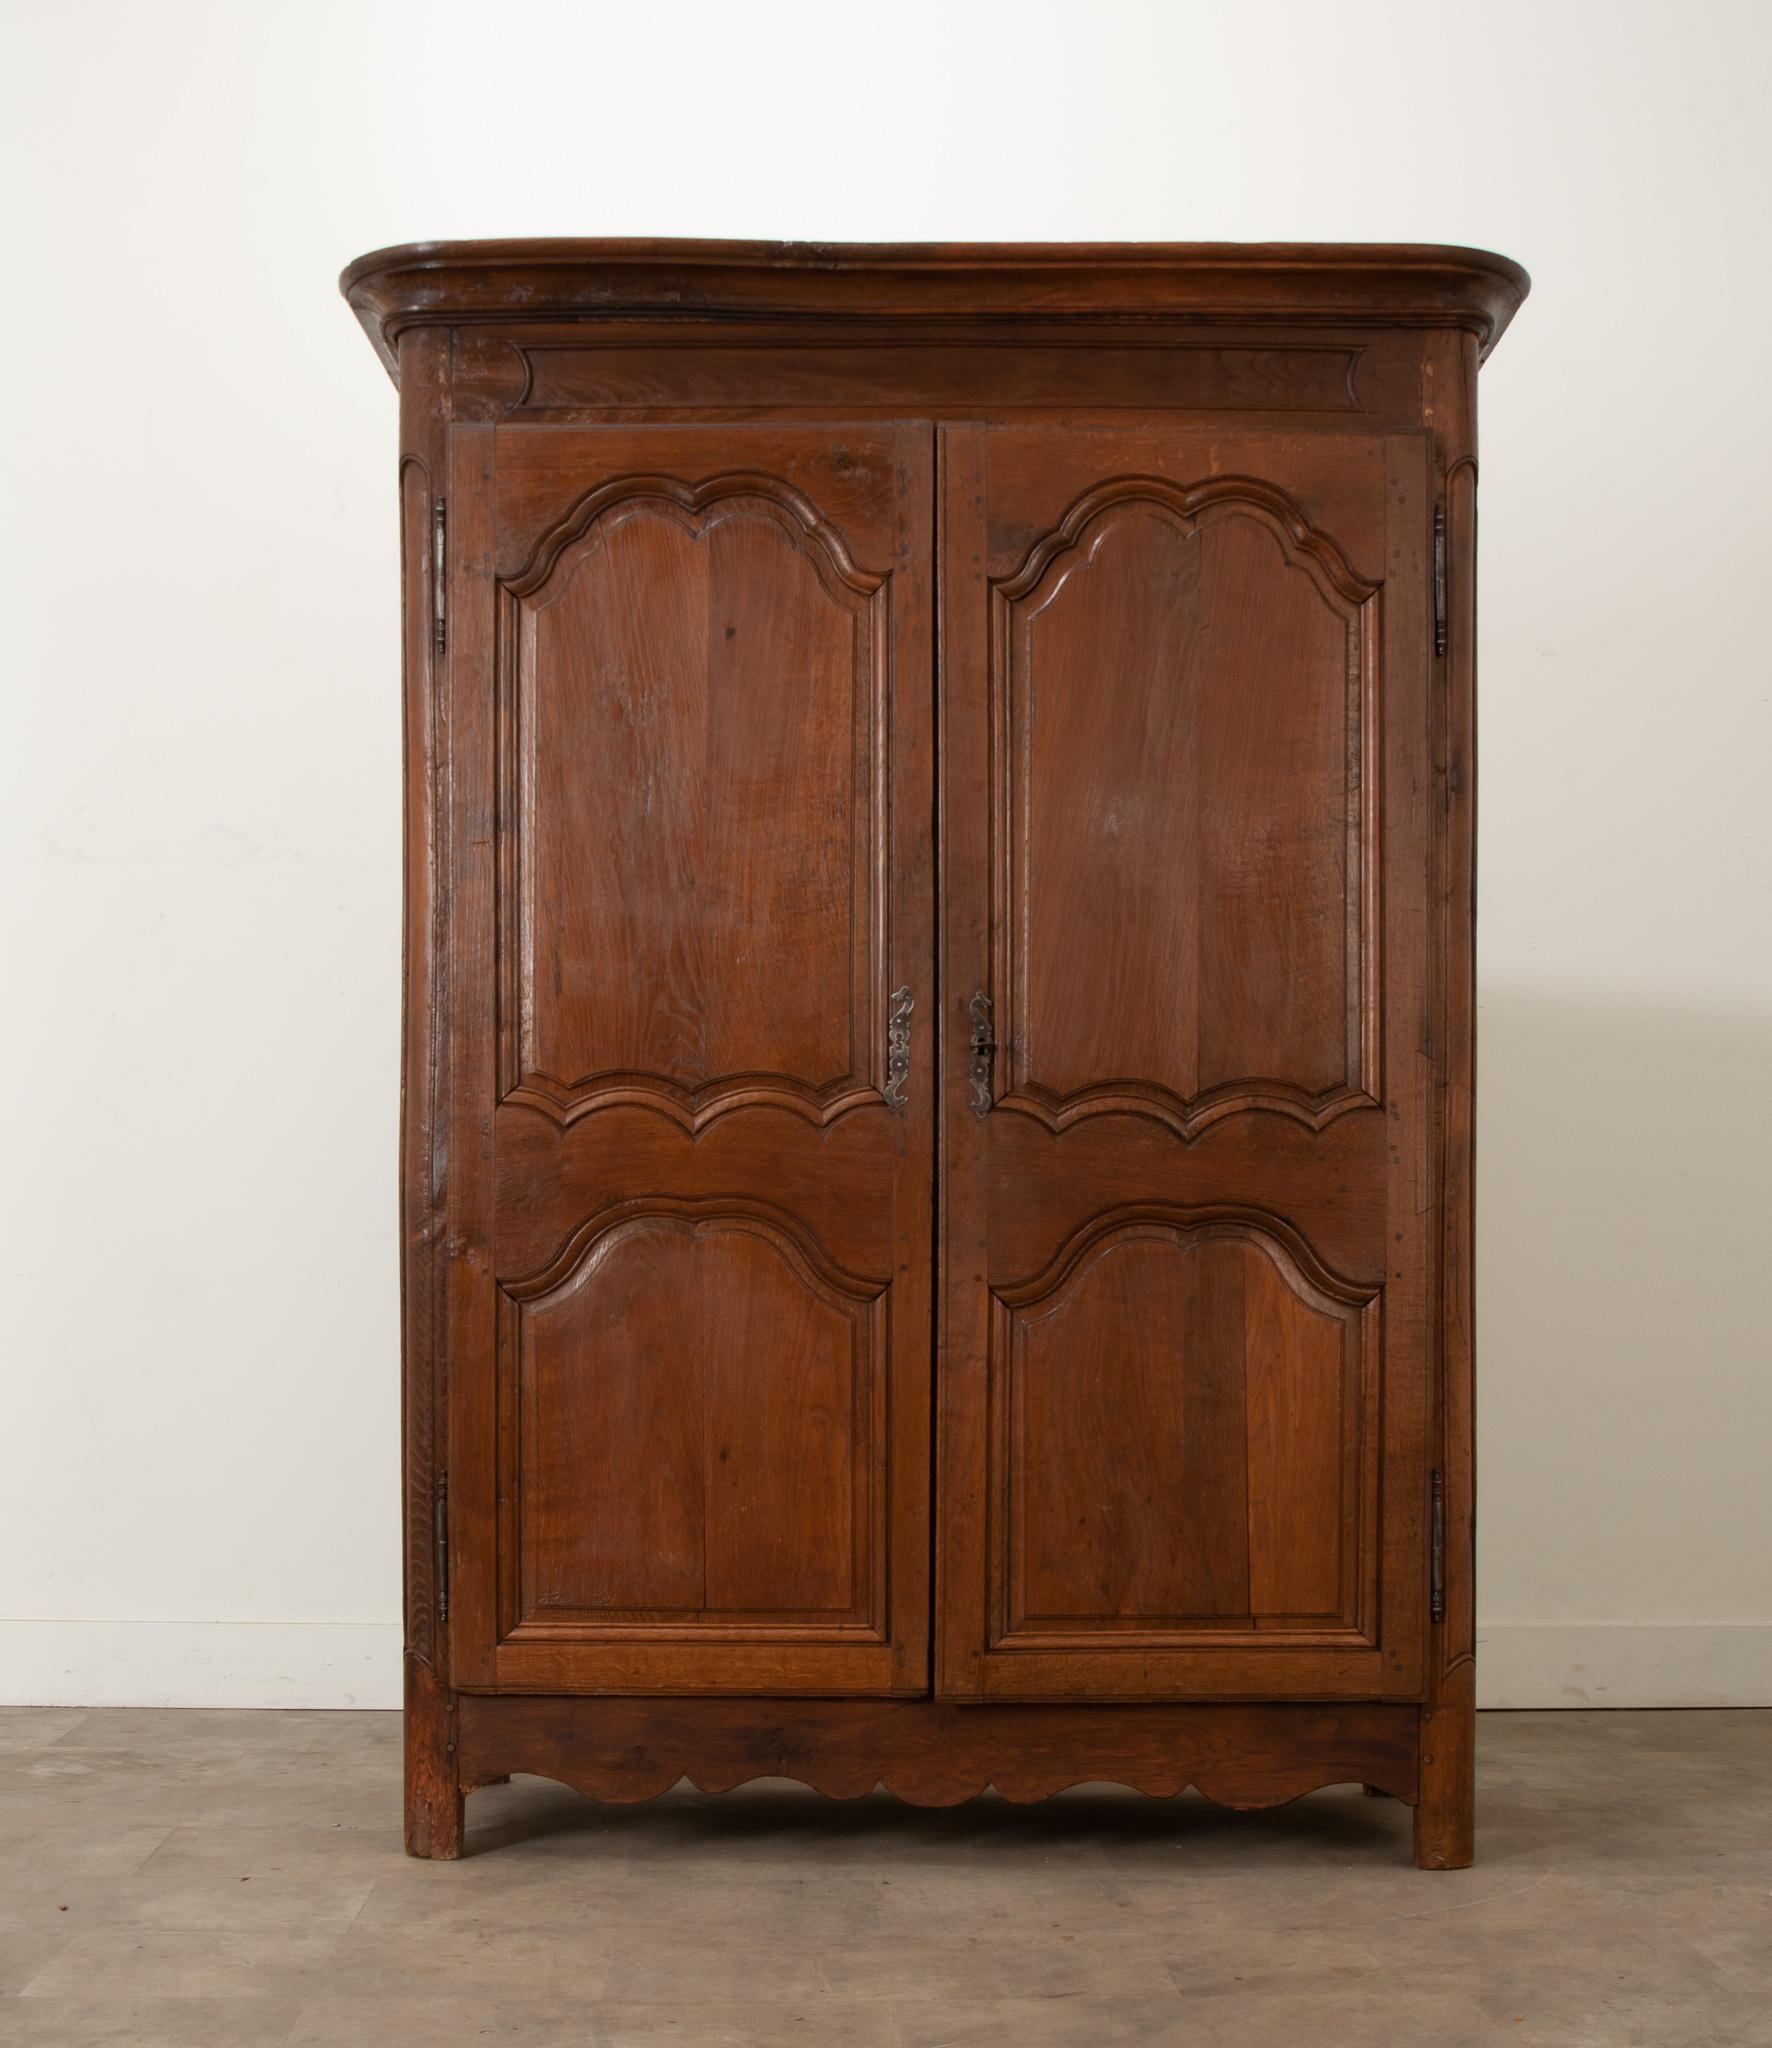 This French 18th century armoire in the Louis XV style has a fantastic dark oak finish and gorgeous hand carved details. This piece retains its original locking systems and one key. The pair of doors unlock to reveal a large storage cavity with